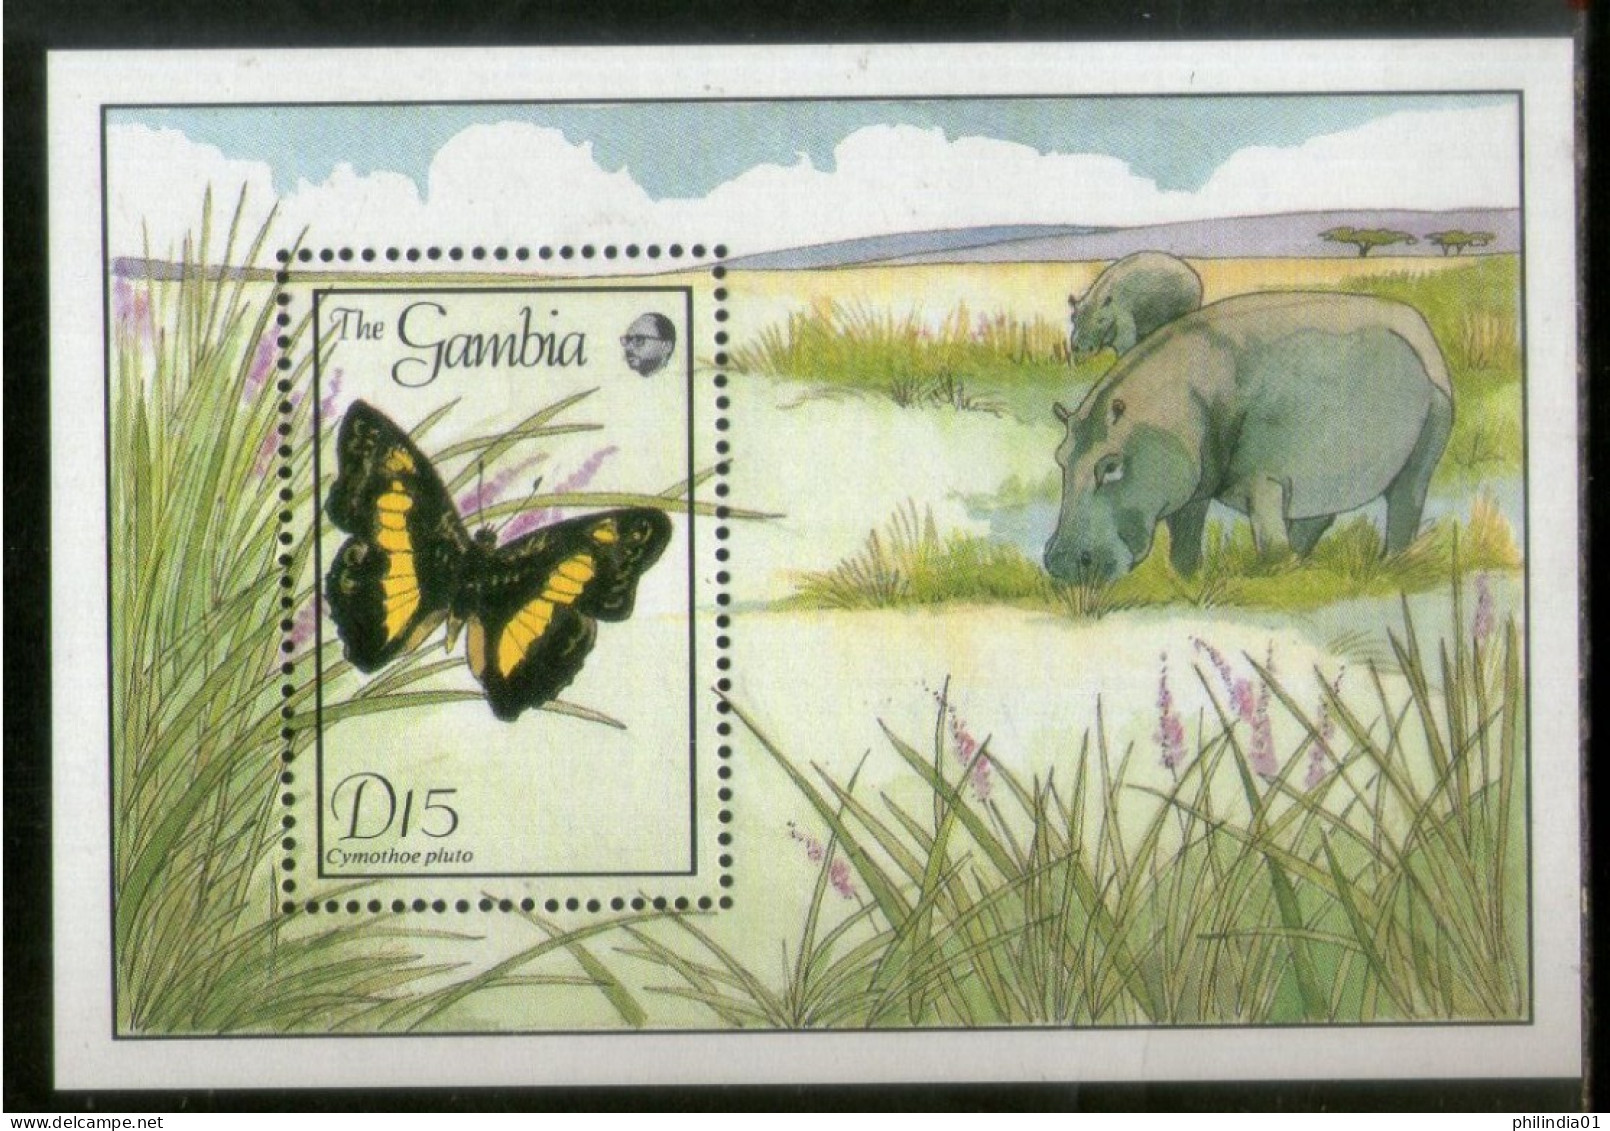 Gambia 1989 Butterflies Moth Insect Hippo Wildlife Animals Sc 845 M/s MNH # 1584 - Butterflies